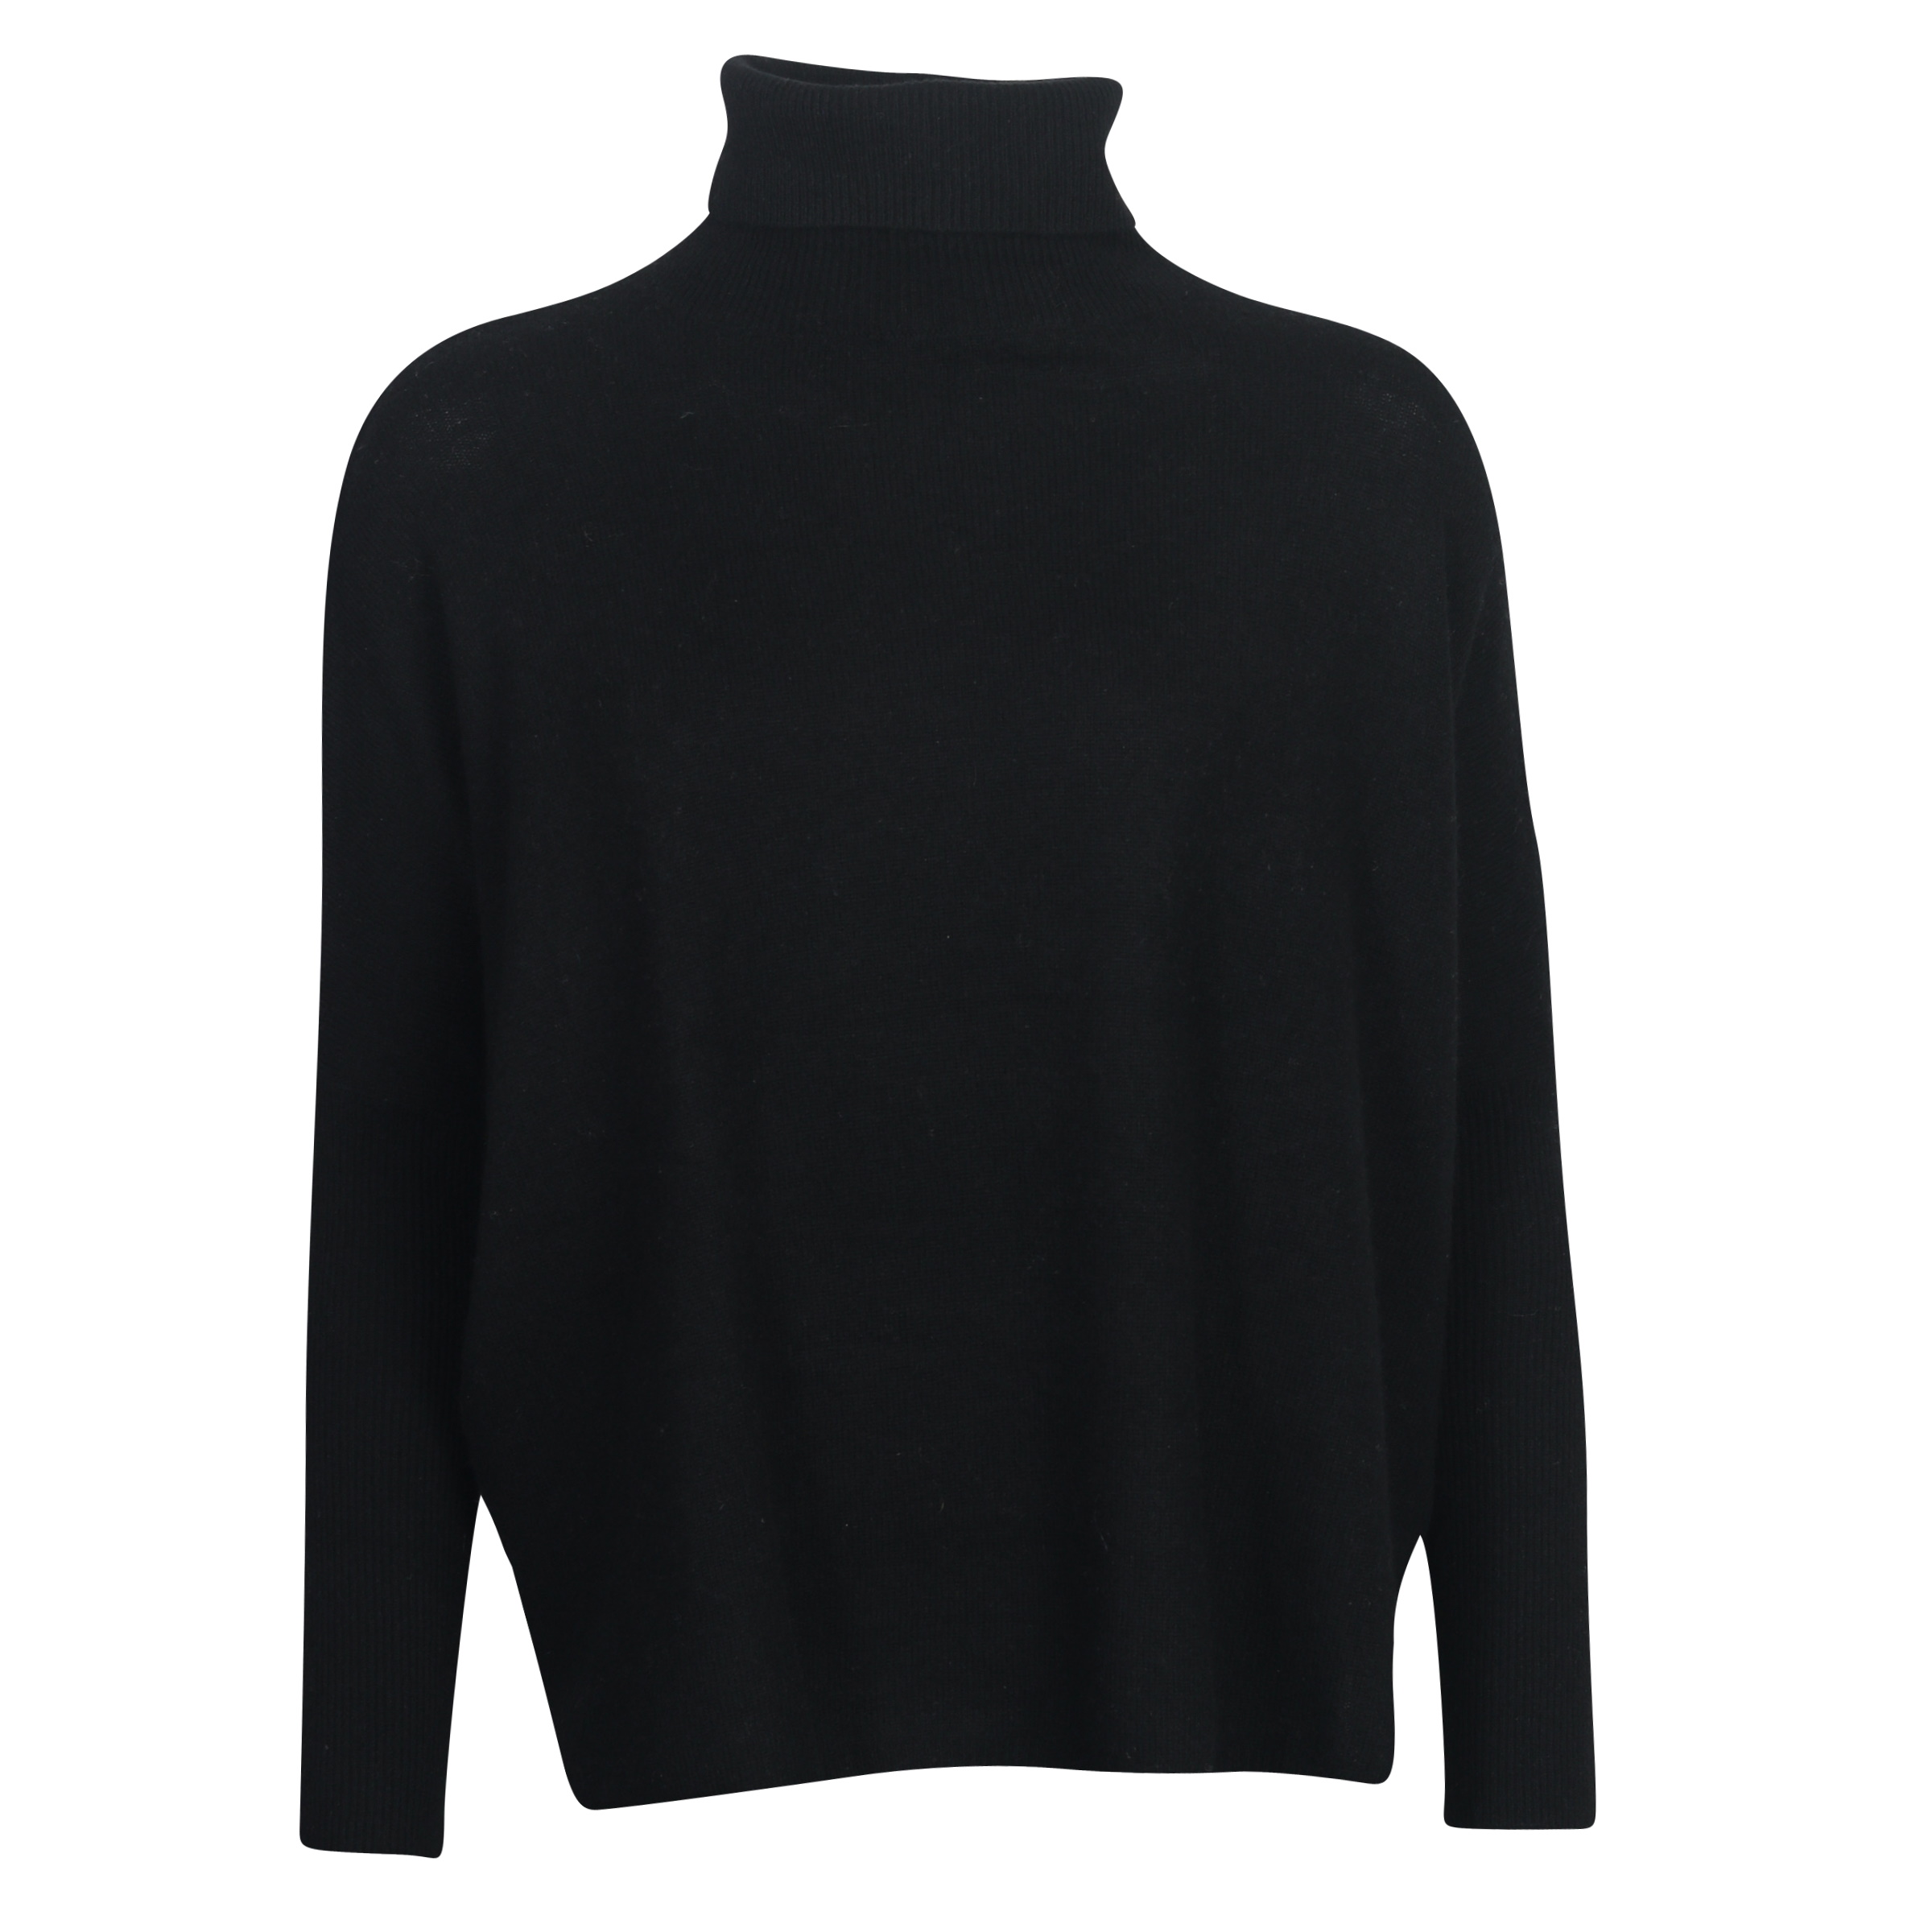 Absolut Cashmere Oversized Turtle Neck Sweater Clara in Black S